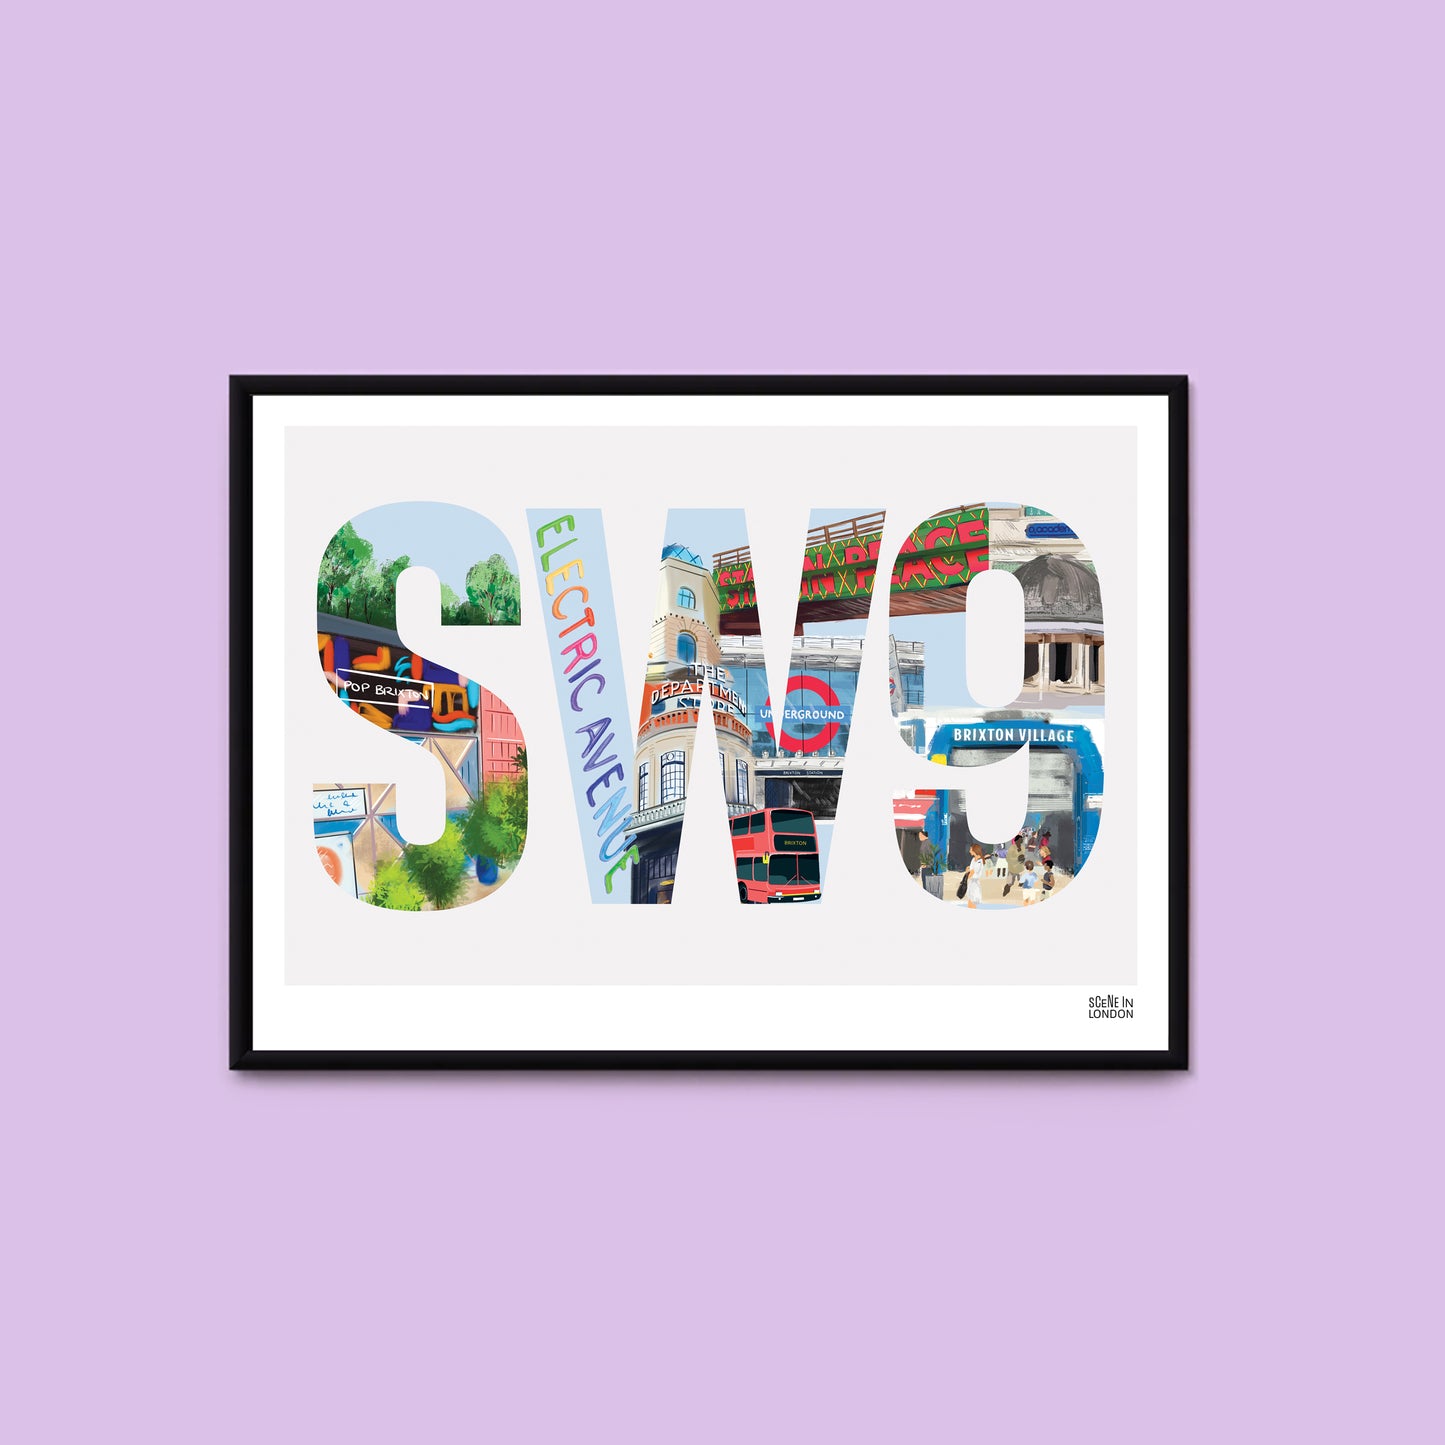 Brixton art print featuring places in SW9, London